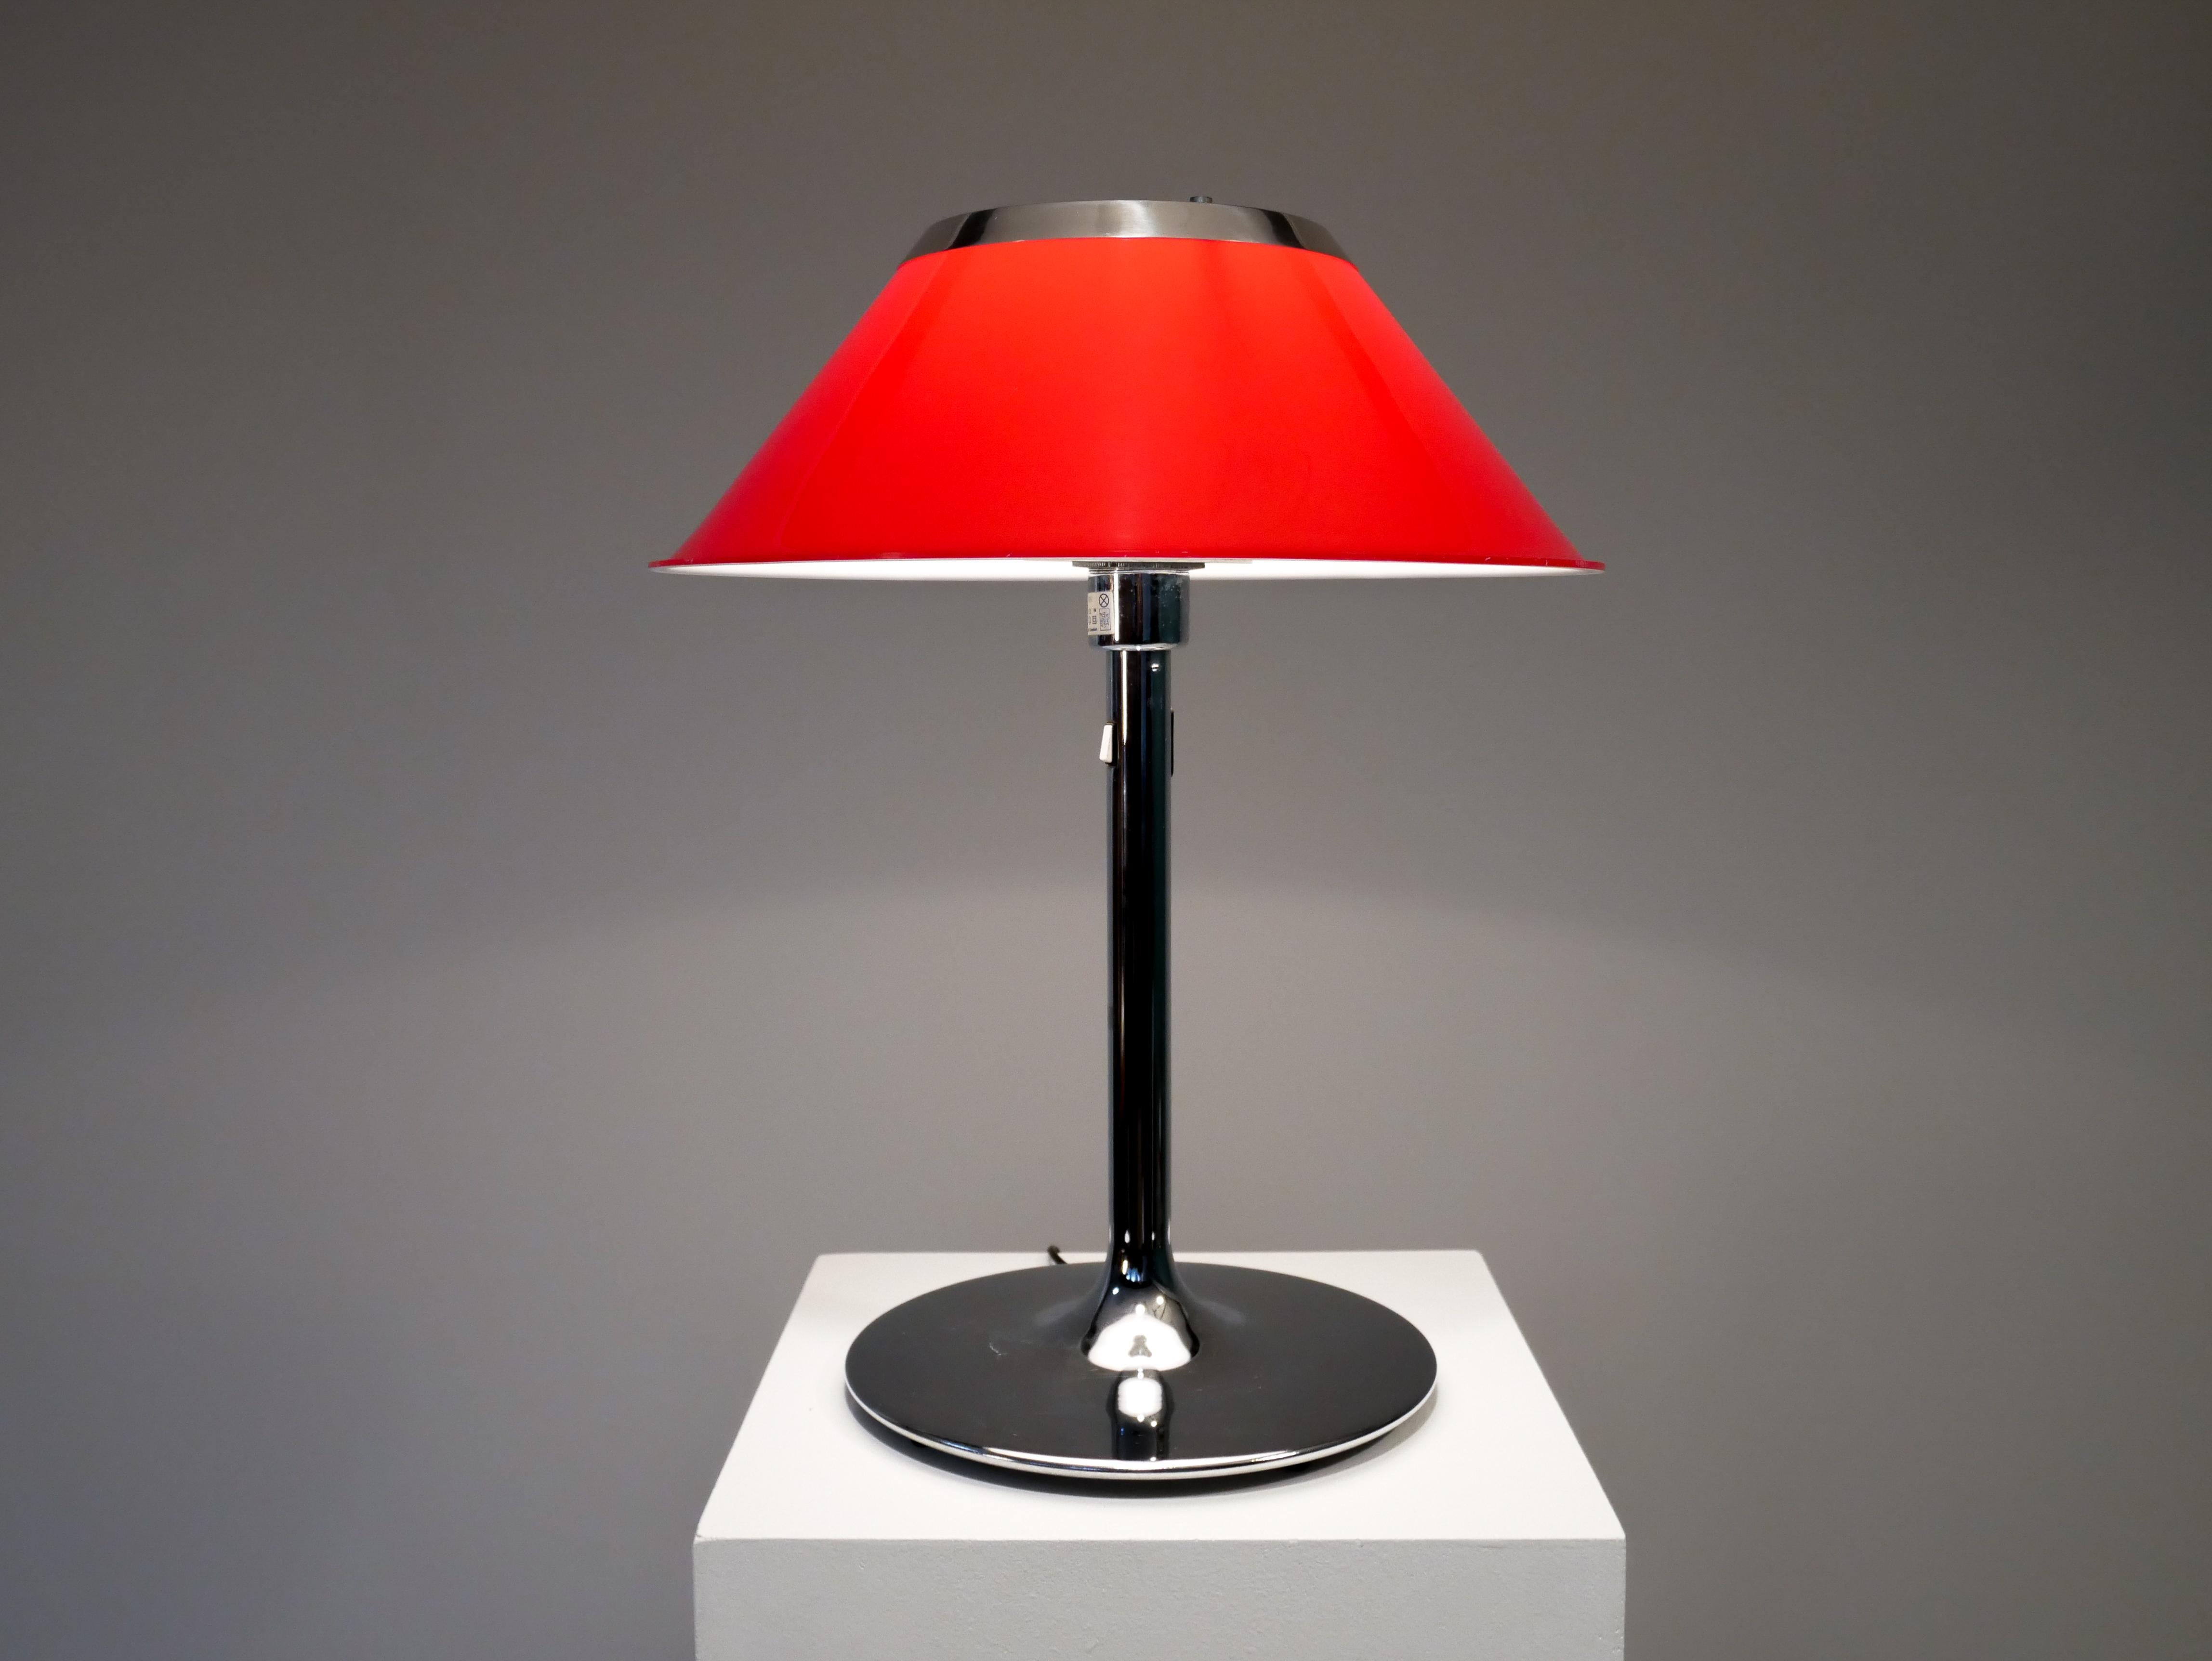 Rare color edition of the mars lamp in deep red.
Designed by Per Sundstedt, 1970s.